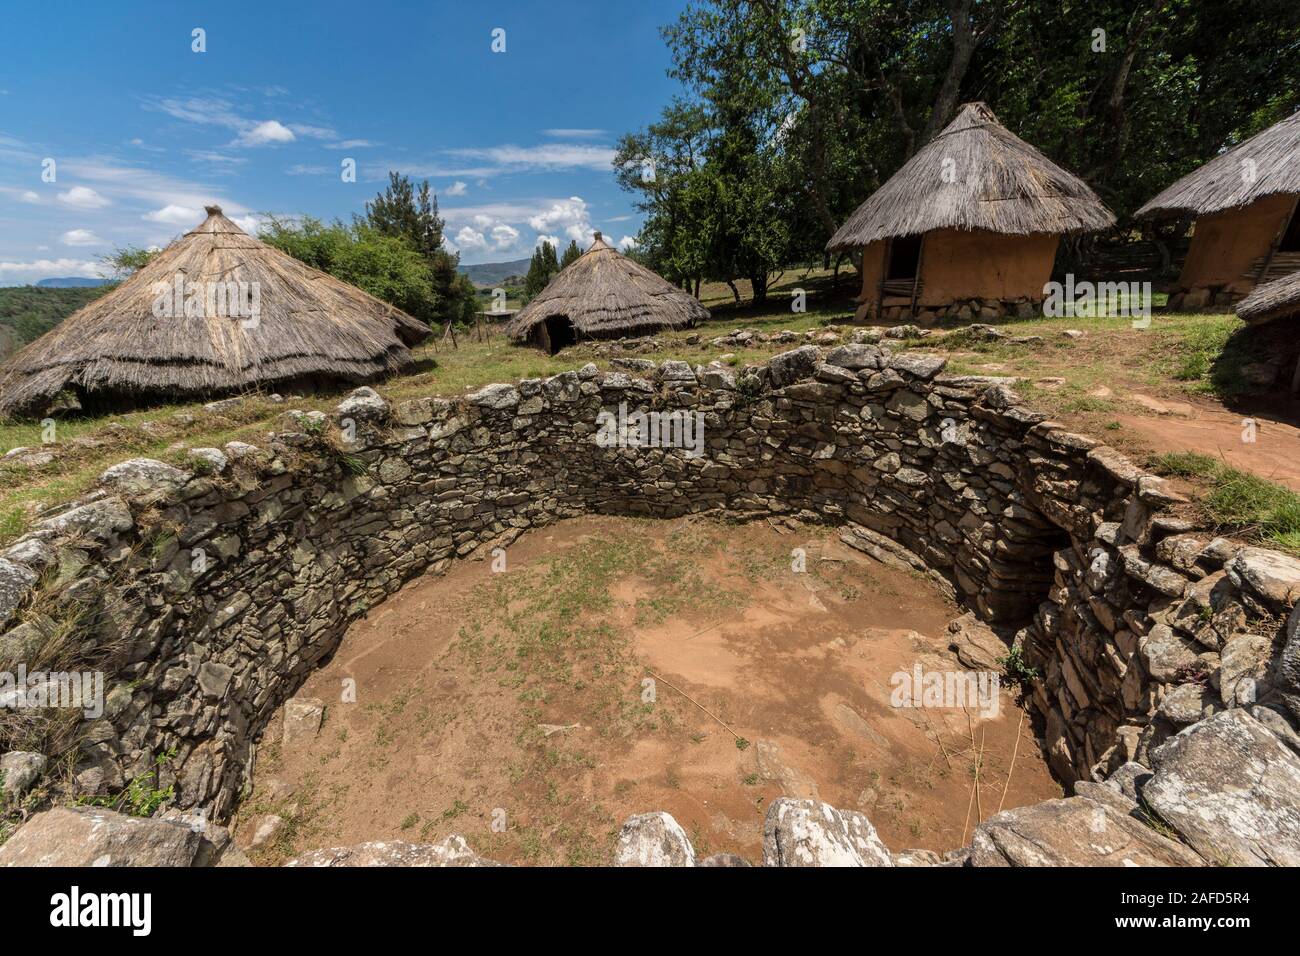 Nyanga National Park, Zinmbabwe. ancient pits - probably for cattle - with a recreation of a Kraal (traditional village) in the background. Stock Photo